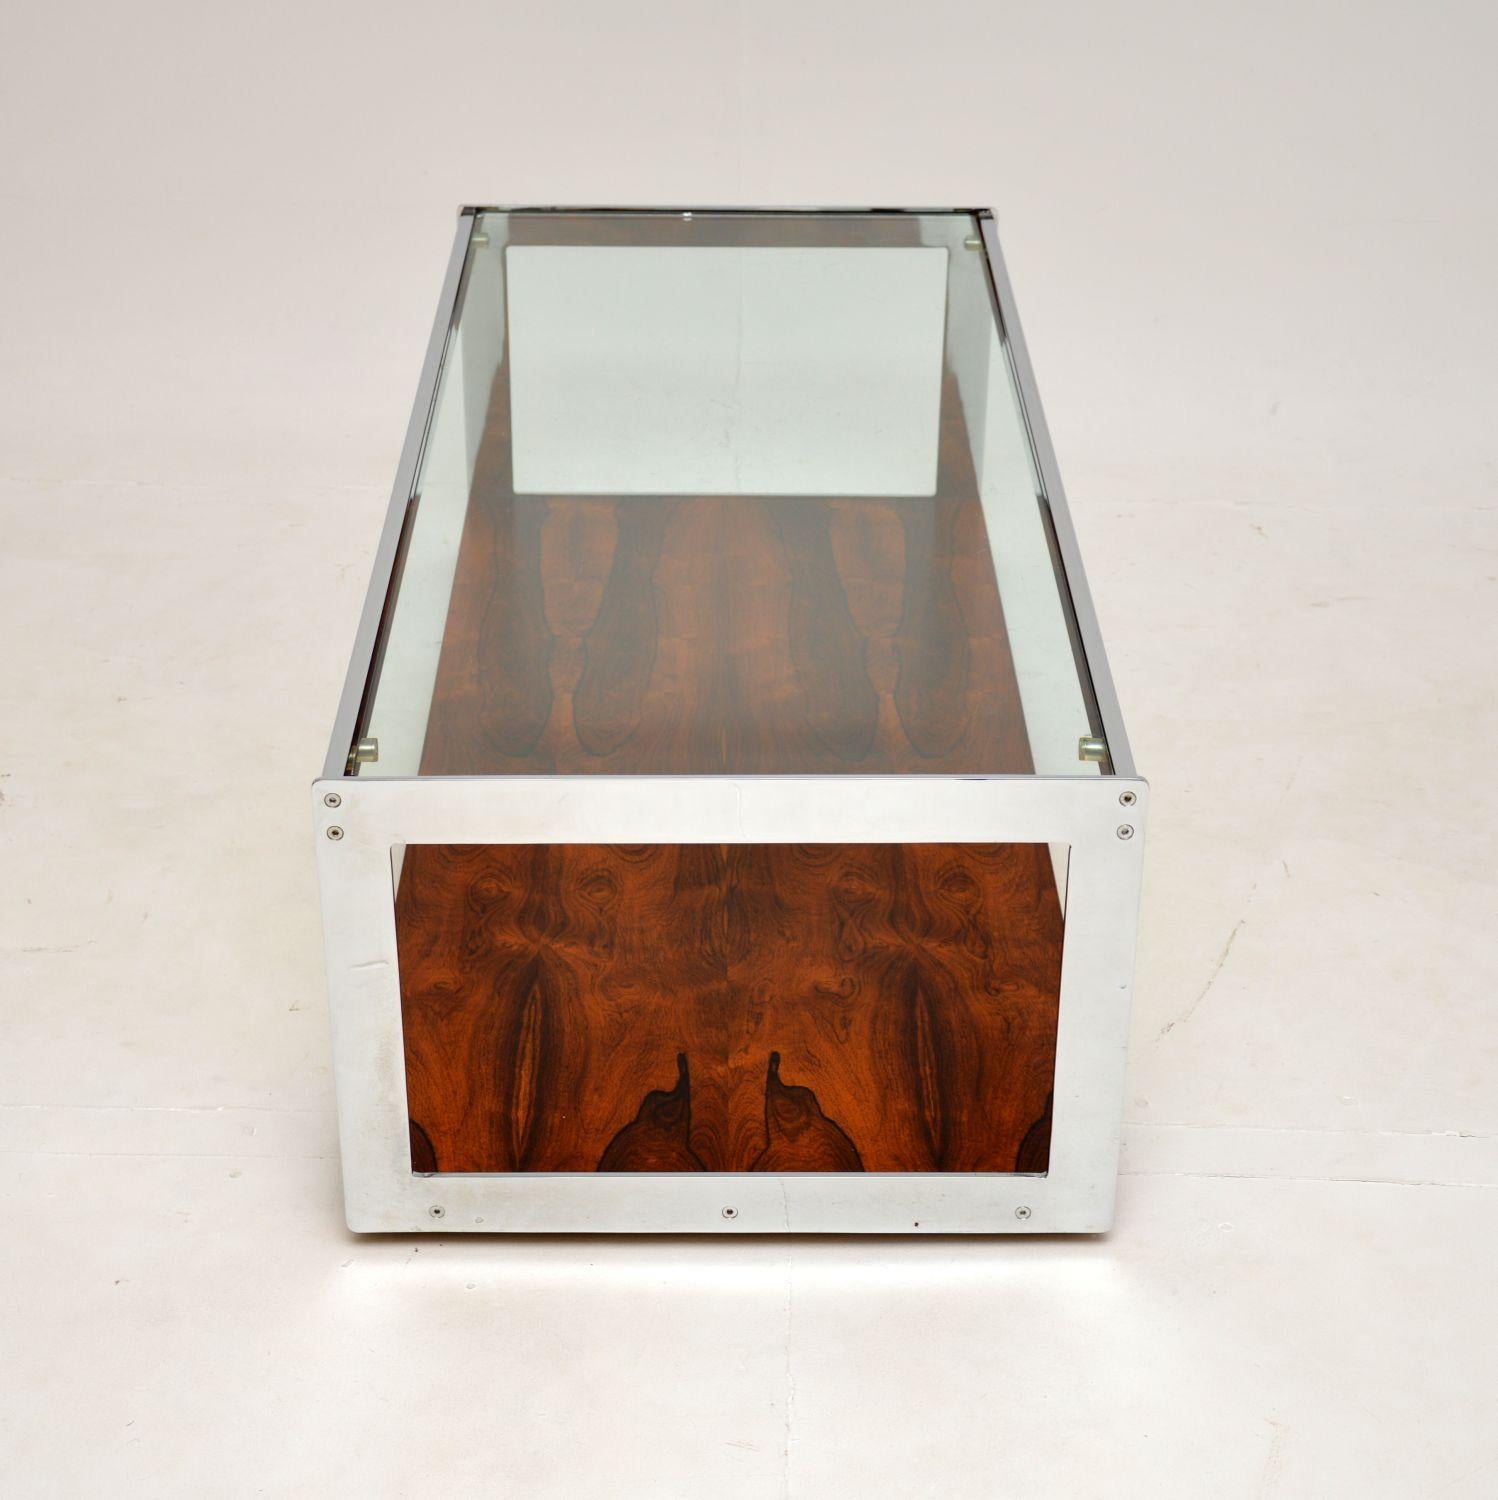 Vintage Coffee Table by Merrow Associates In Good Condition For Sale In London, GB